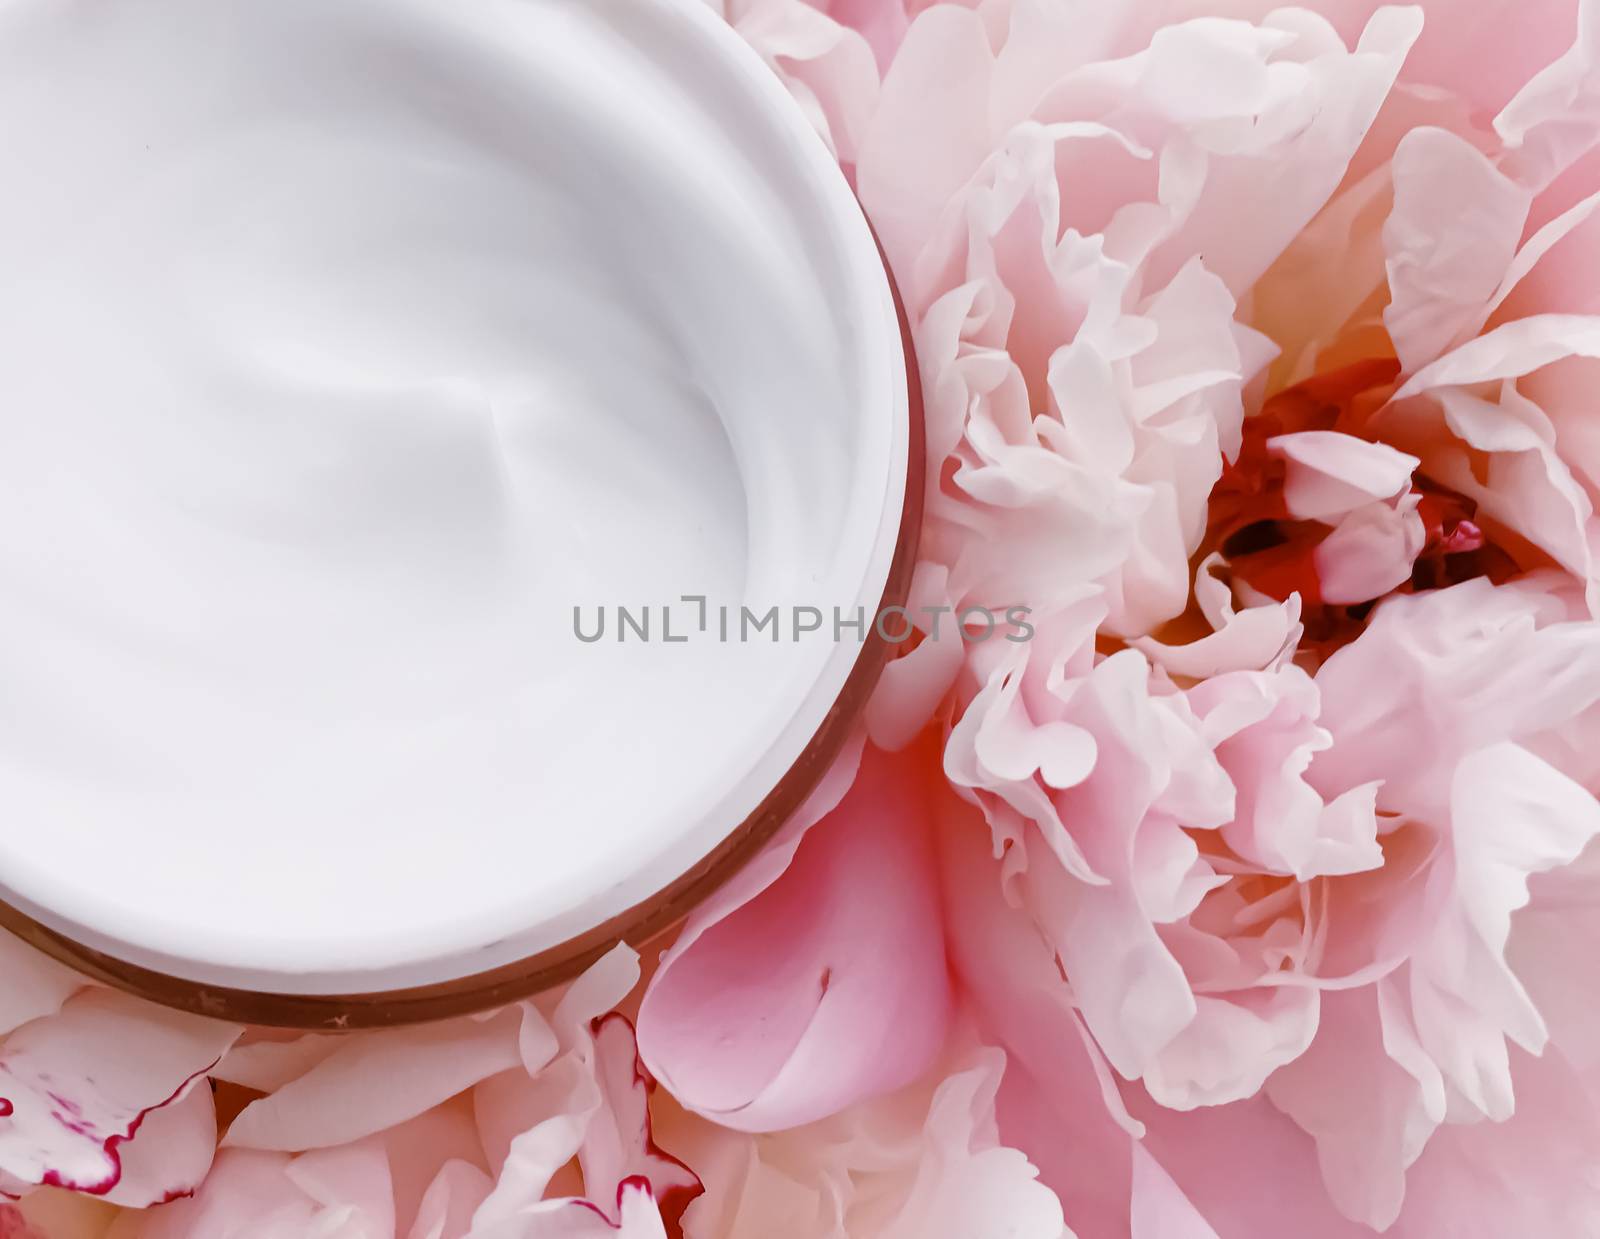 Face cream moisturizer on floral background as luxury skincare cosmetics, healthcare and beauty product by Anneleven